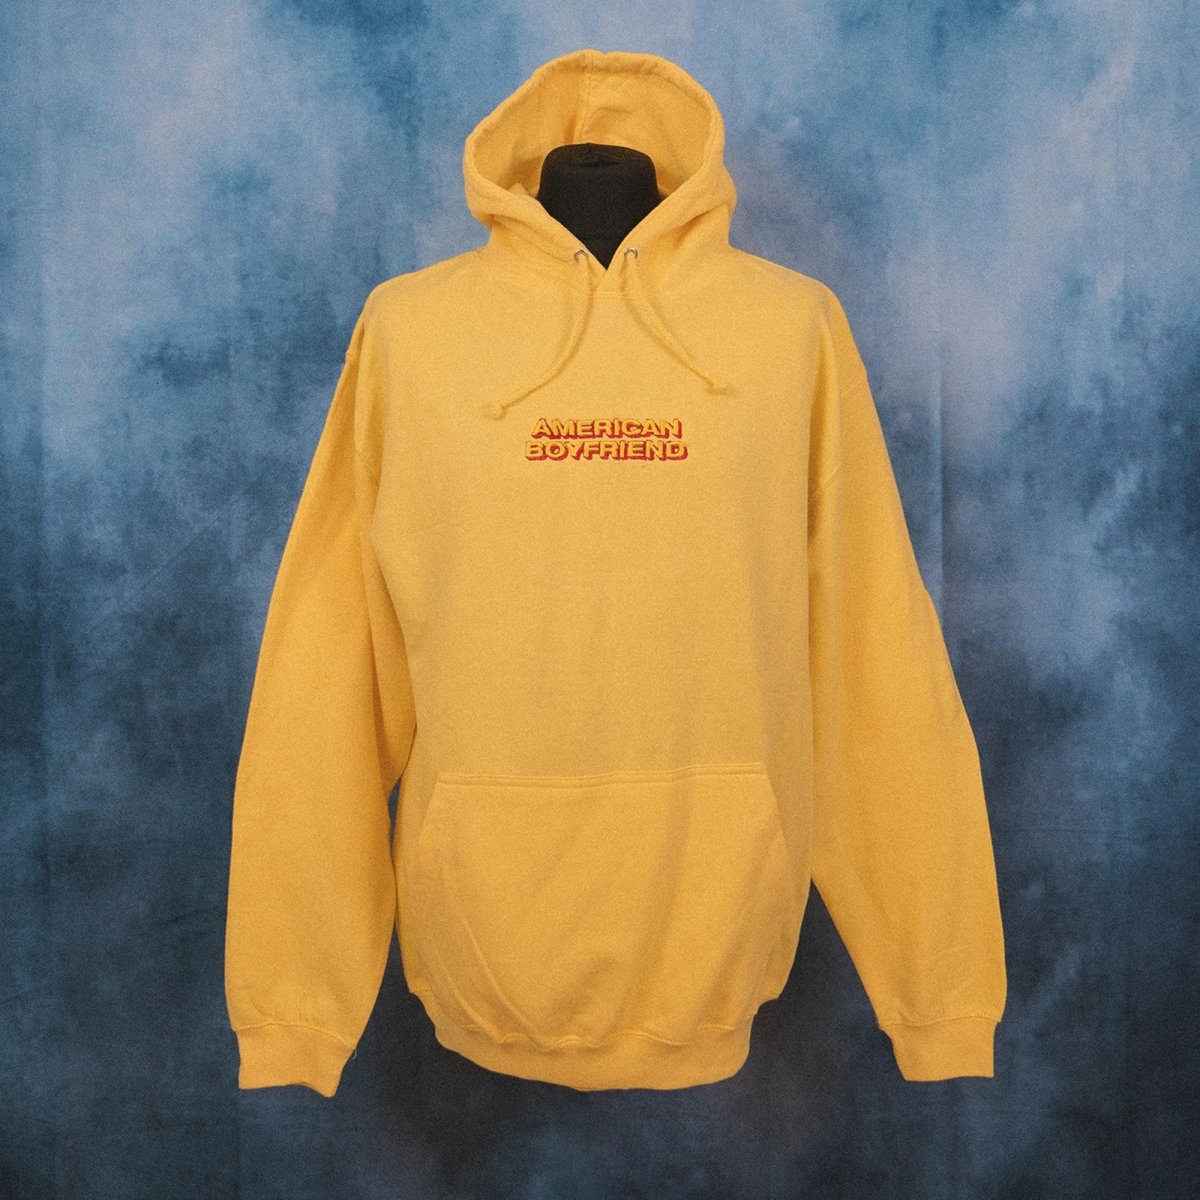 Kevin Abstract - American Boyfriend Unisex Embroidered Hoodie